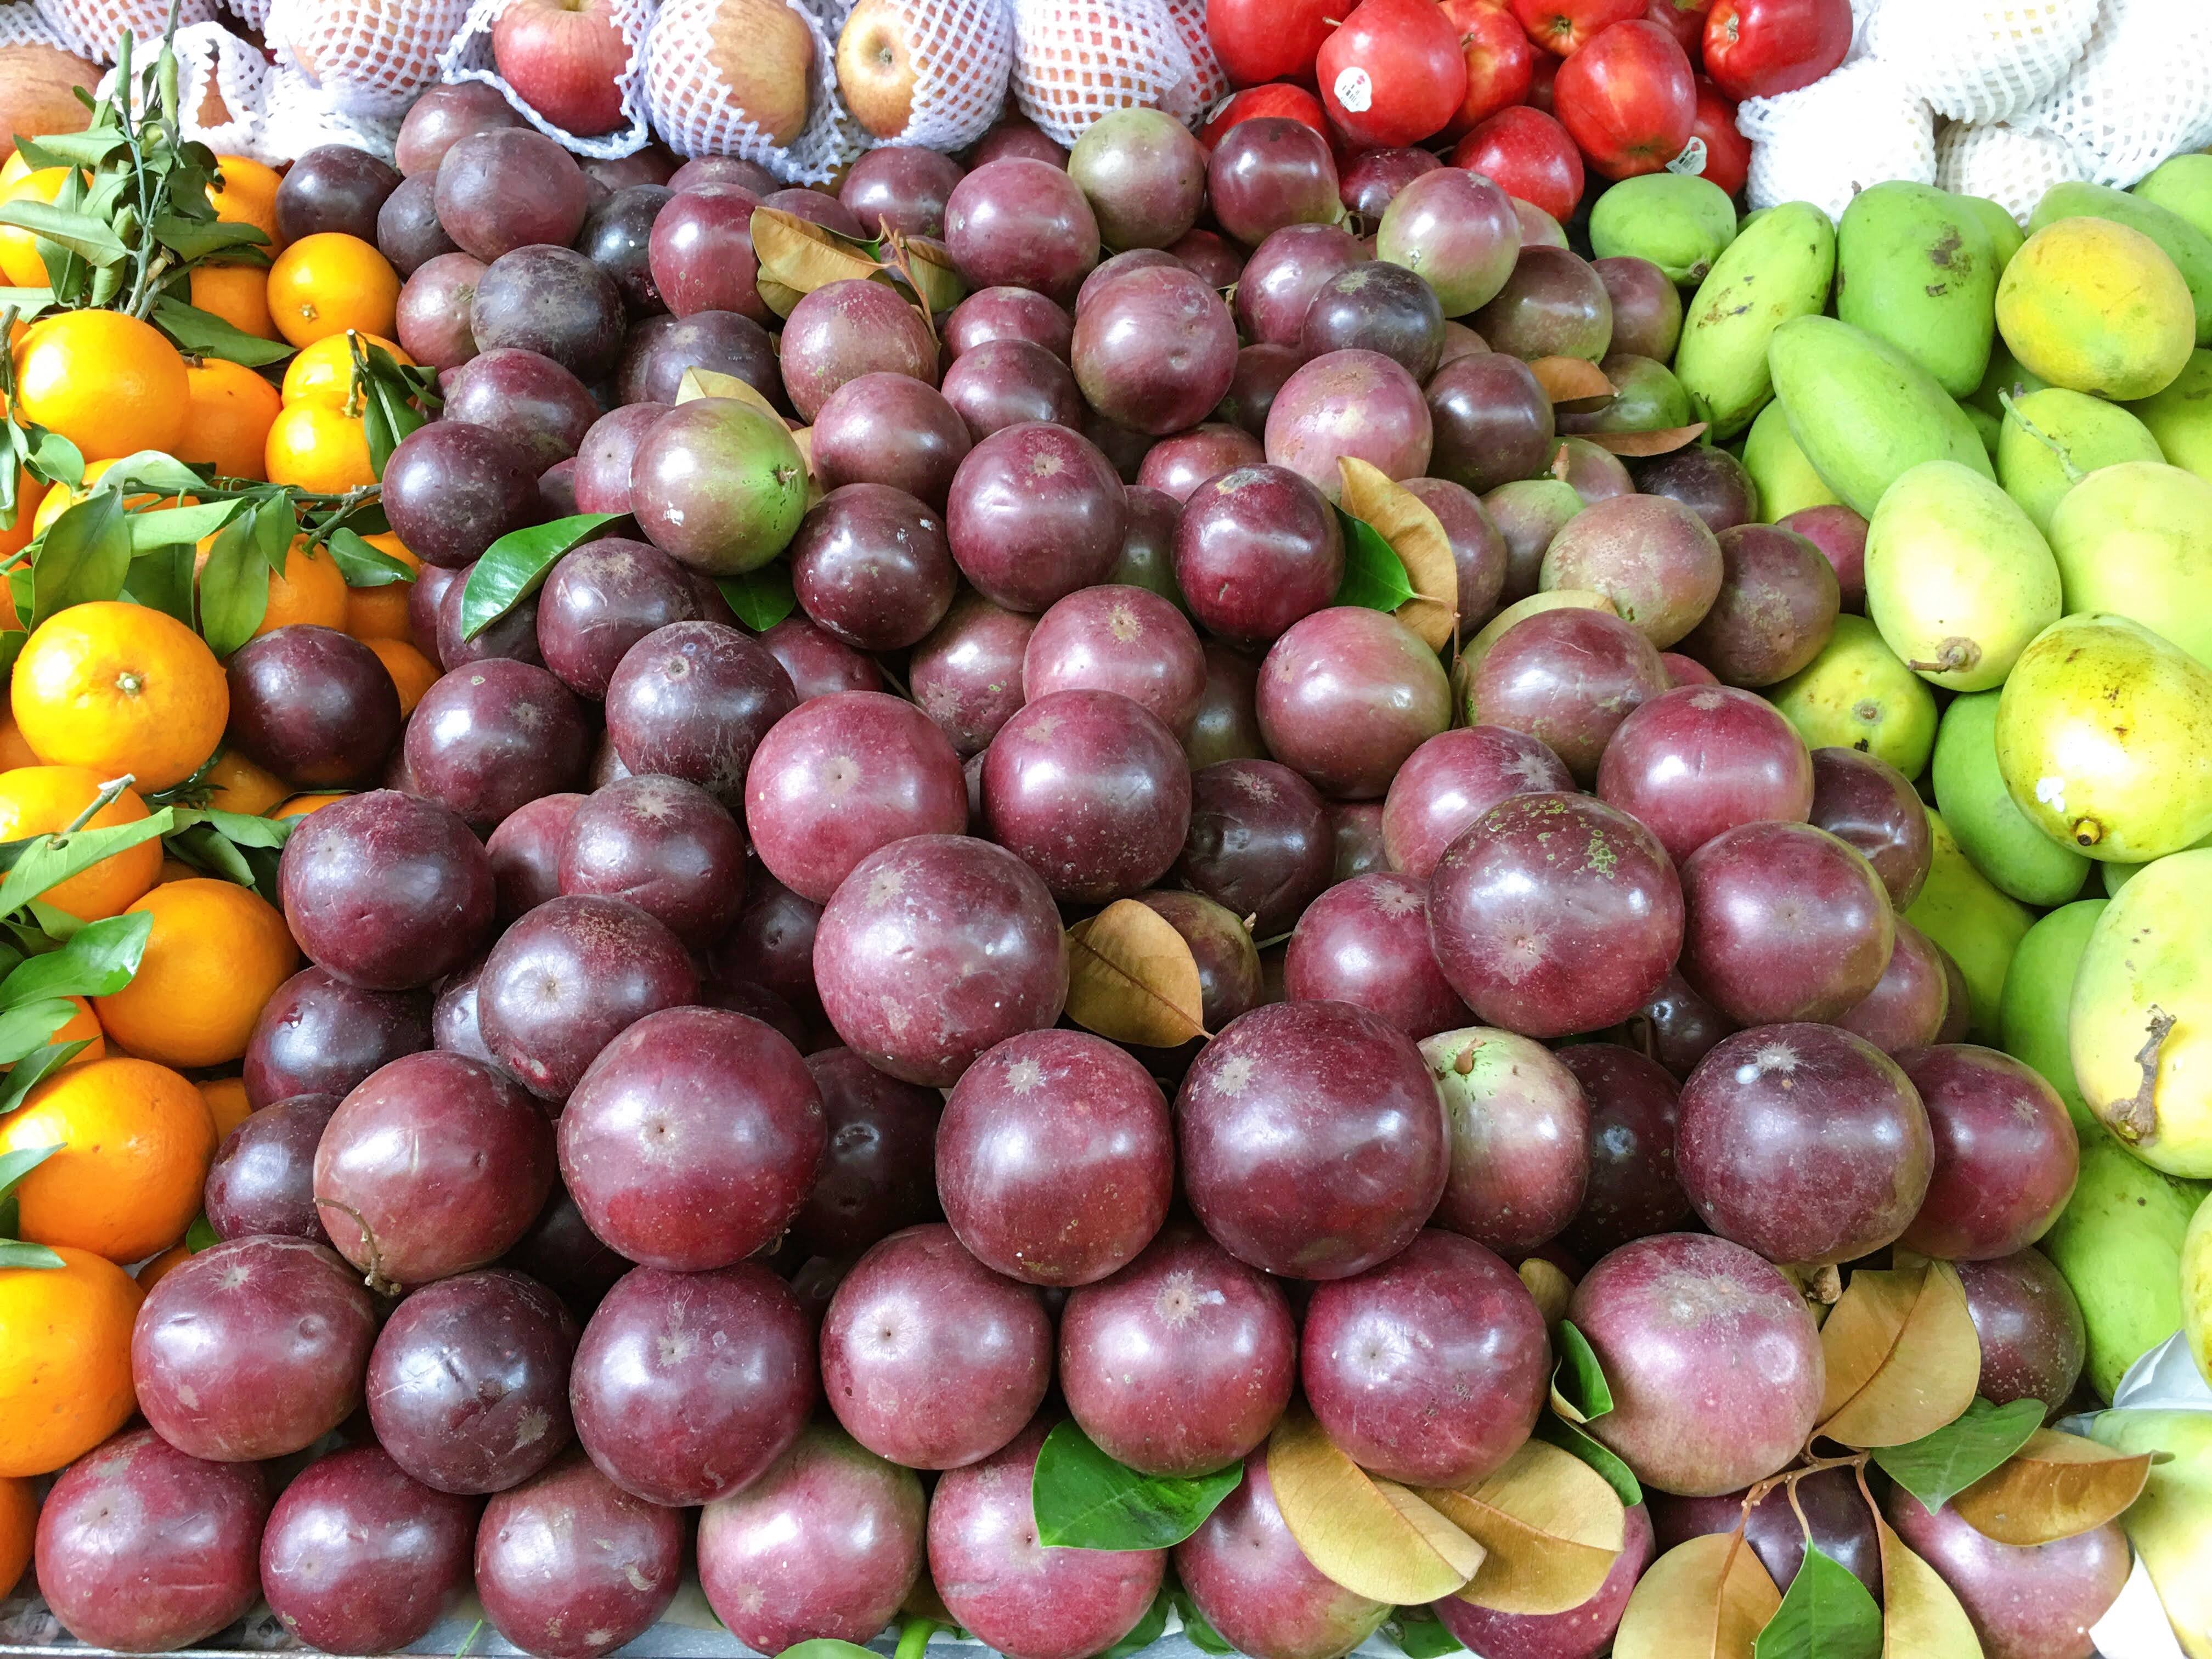 A photo shows star apples, a type of tropical fruits which are grown mostly in Vietnam’s Mekong Delta region, sold at a local market in Ho Chi Minh City. Photo: Dong Nguyen/ Tuoi Tre News